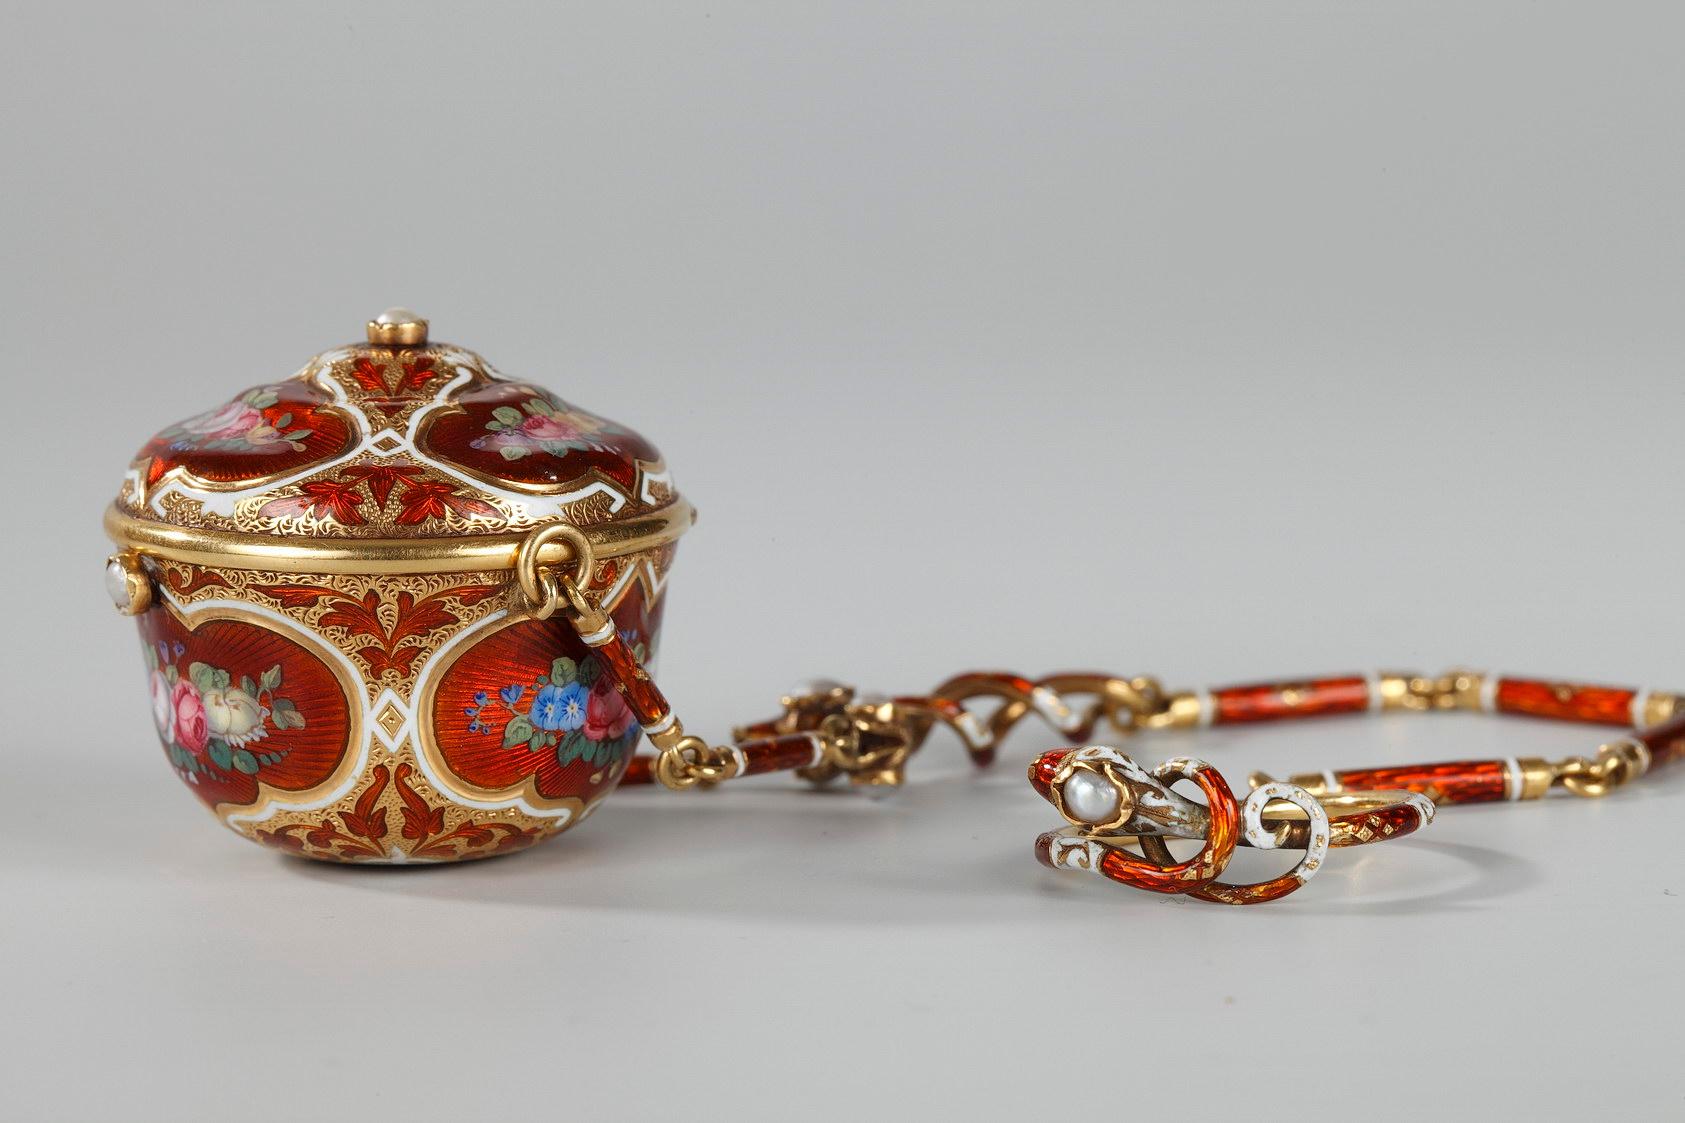 Small vinaigrette in gold and enamel. The miniature basin, which was used to hold fabric or cotton infused with fragrance, and its lid are decorated with multicolored bouquets of flowers framed in white and gold scrollwork and rinceau on a red